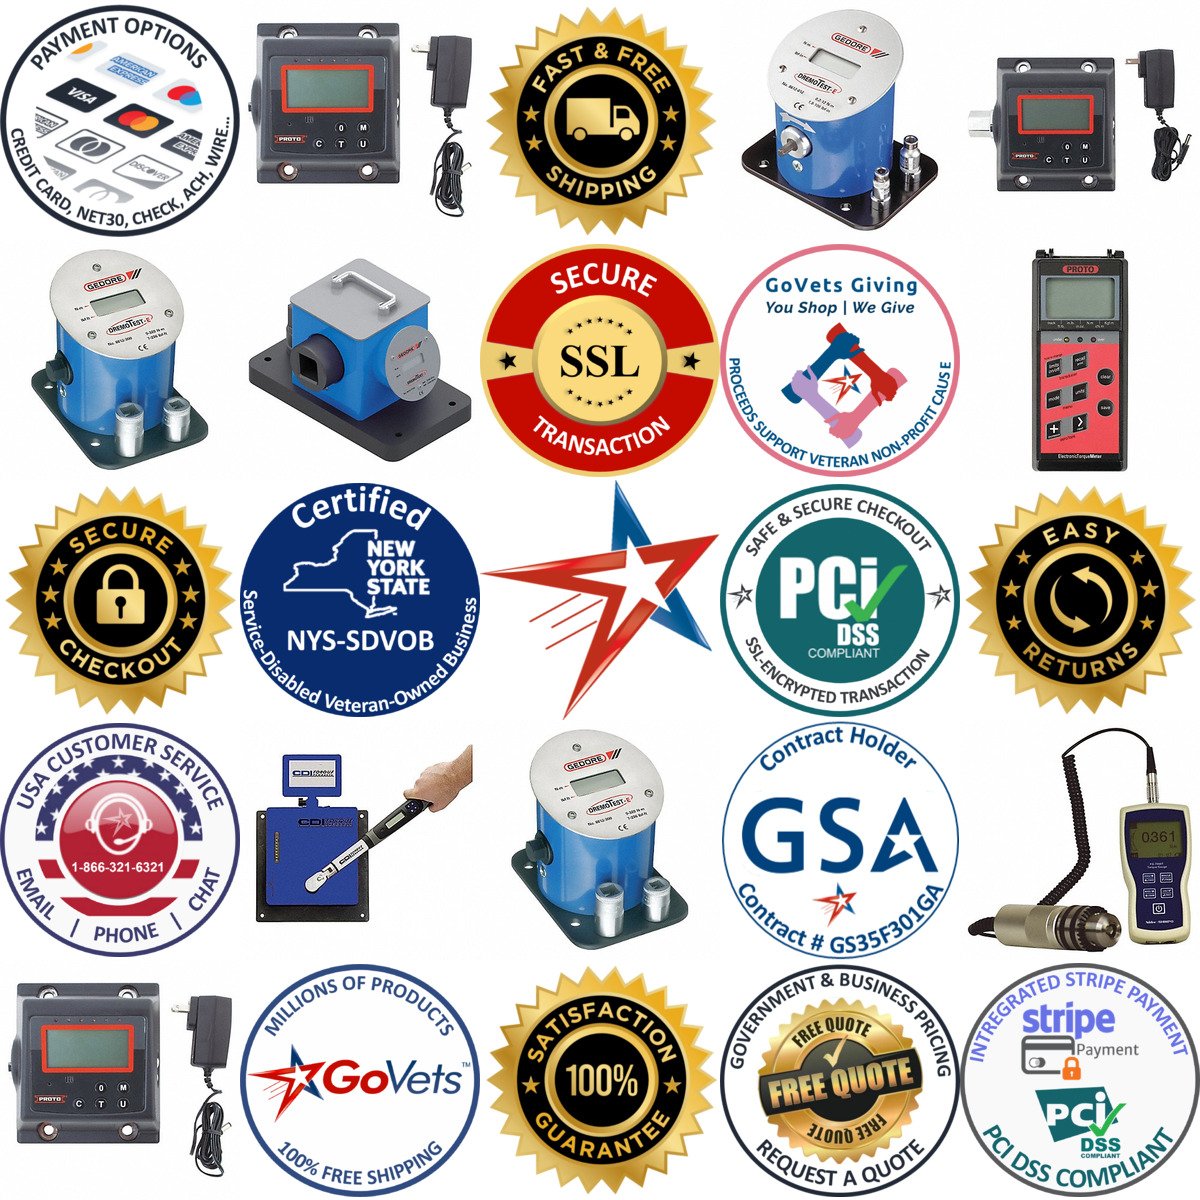 A selection of Electronic Torque Meters and Testers products on GoVets